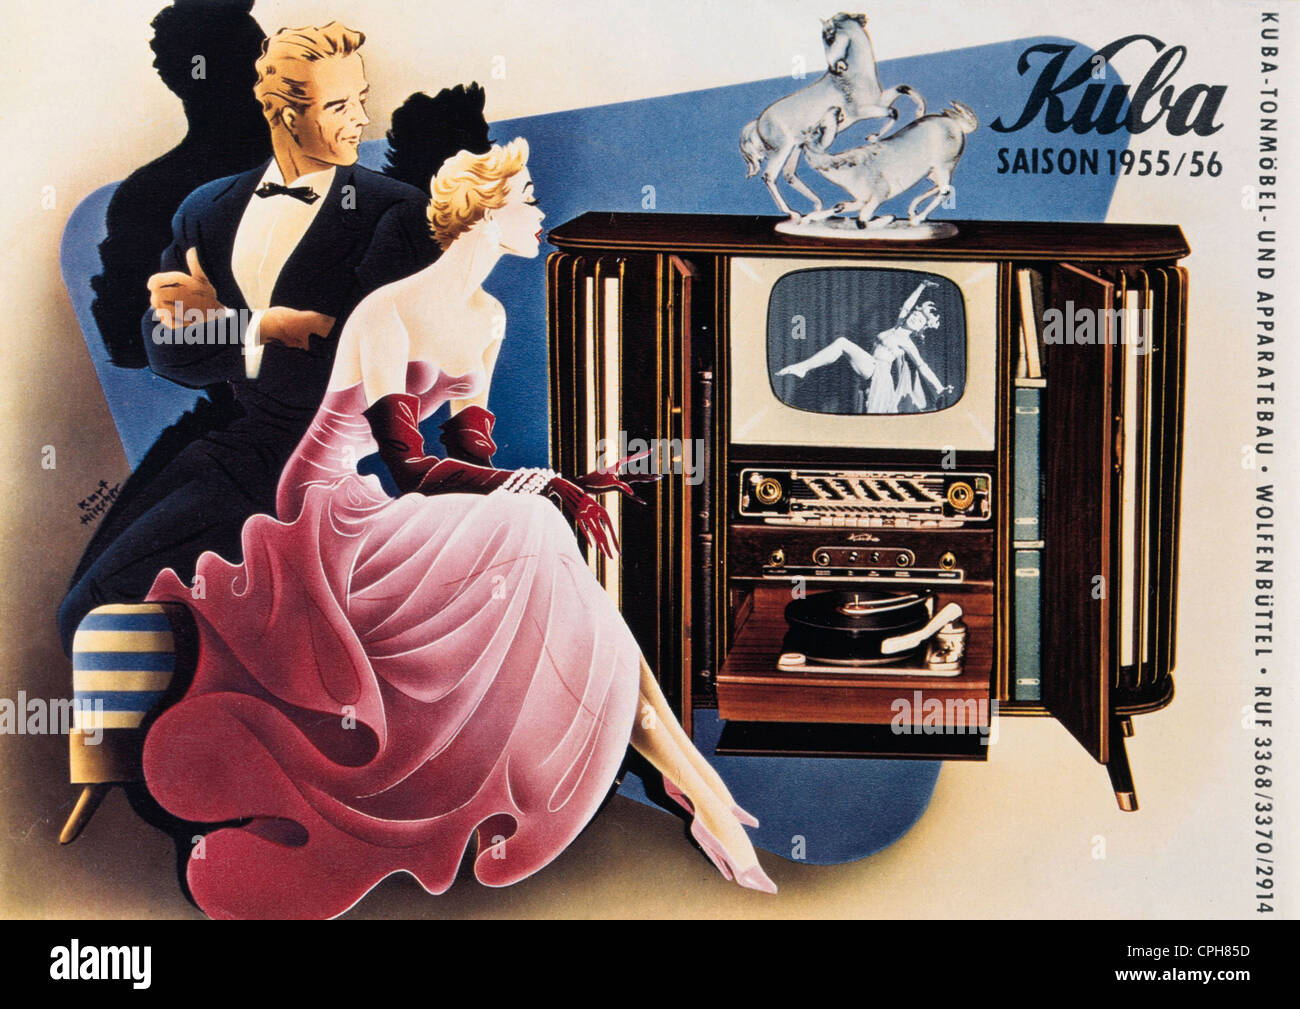 broadcast, television, combinated tv chest 'Kuba Festival', prospectus radiogramophone producer Kuba from Wolfenbuettel, viewer in festive evening dress in front of television set, Germany, 1955, Additional-Rights-Clearences-Not Available Stock Photo